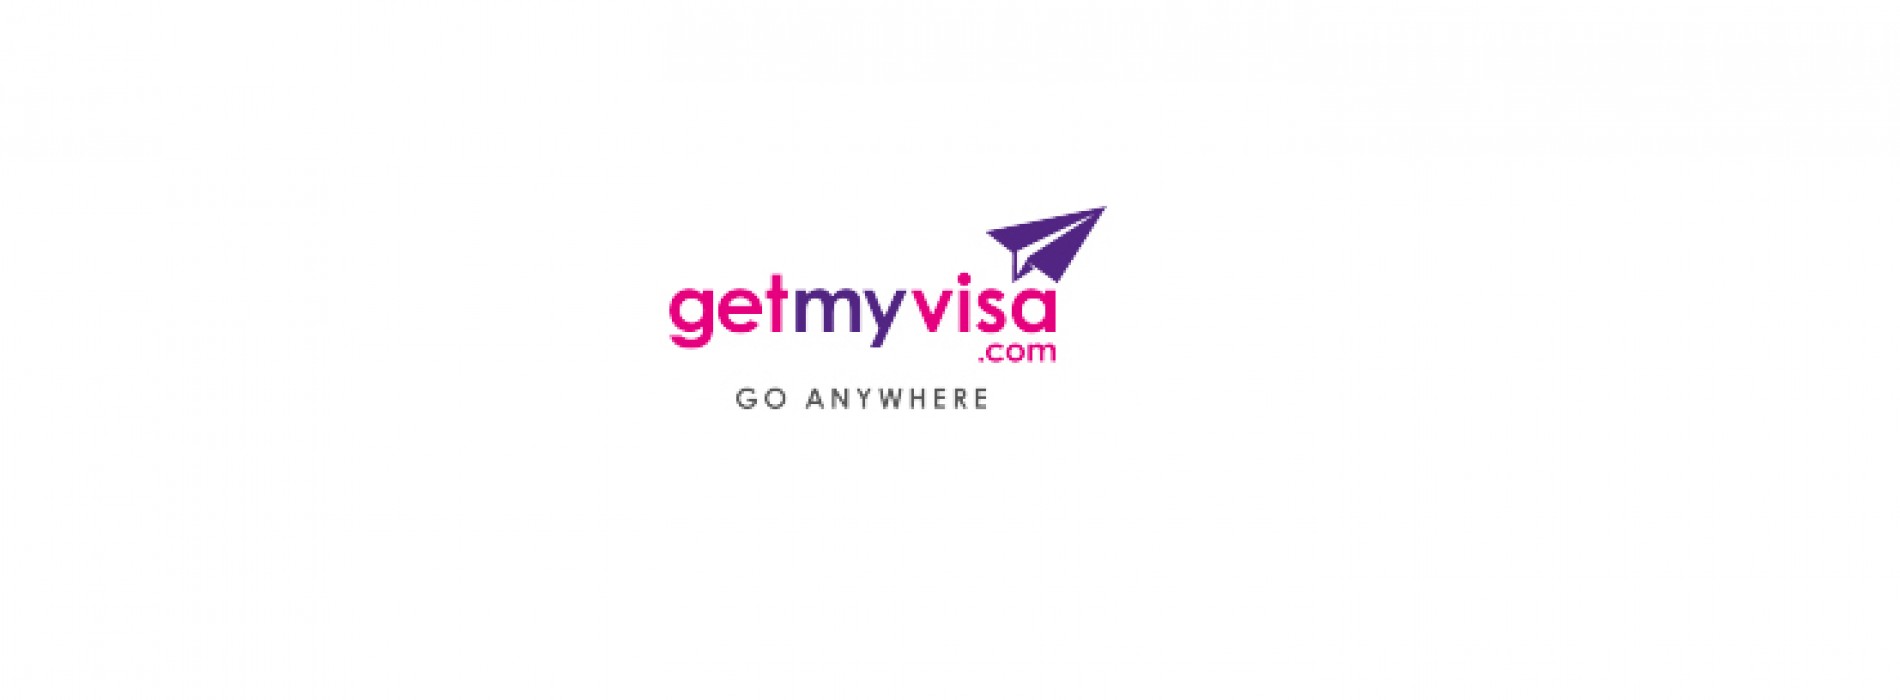 GetMyVisa.com launches online visa application services for 50 most visited destinations